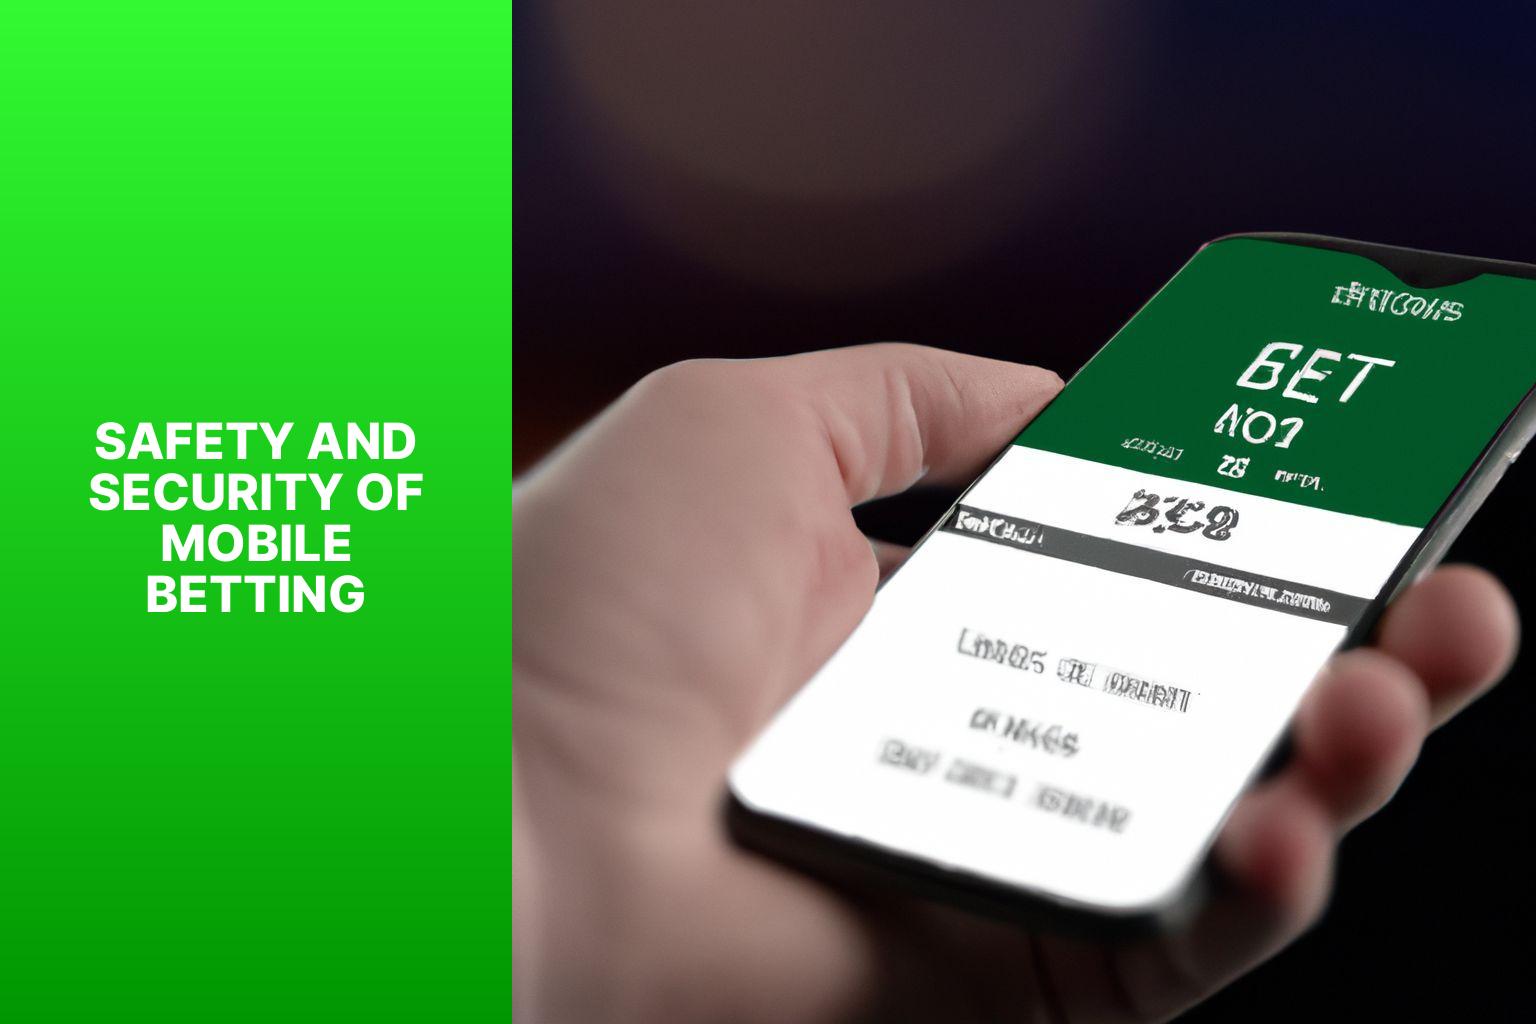 Safety and Security of Mobile Betting - Betting on the Go: Exploring Mobile Bet365 